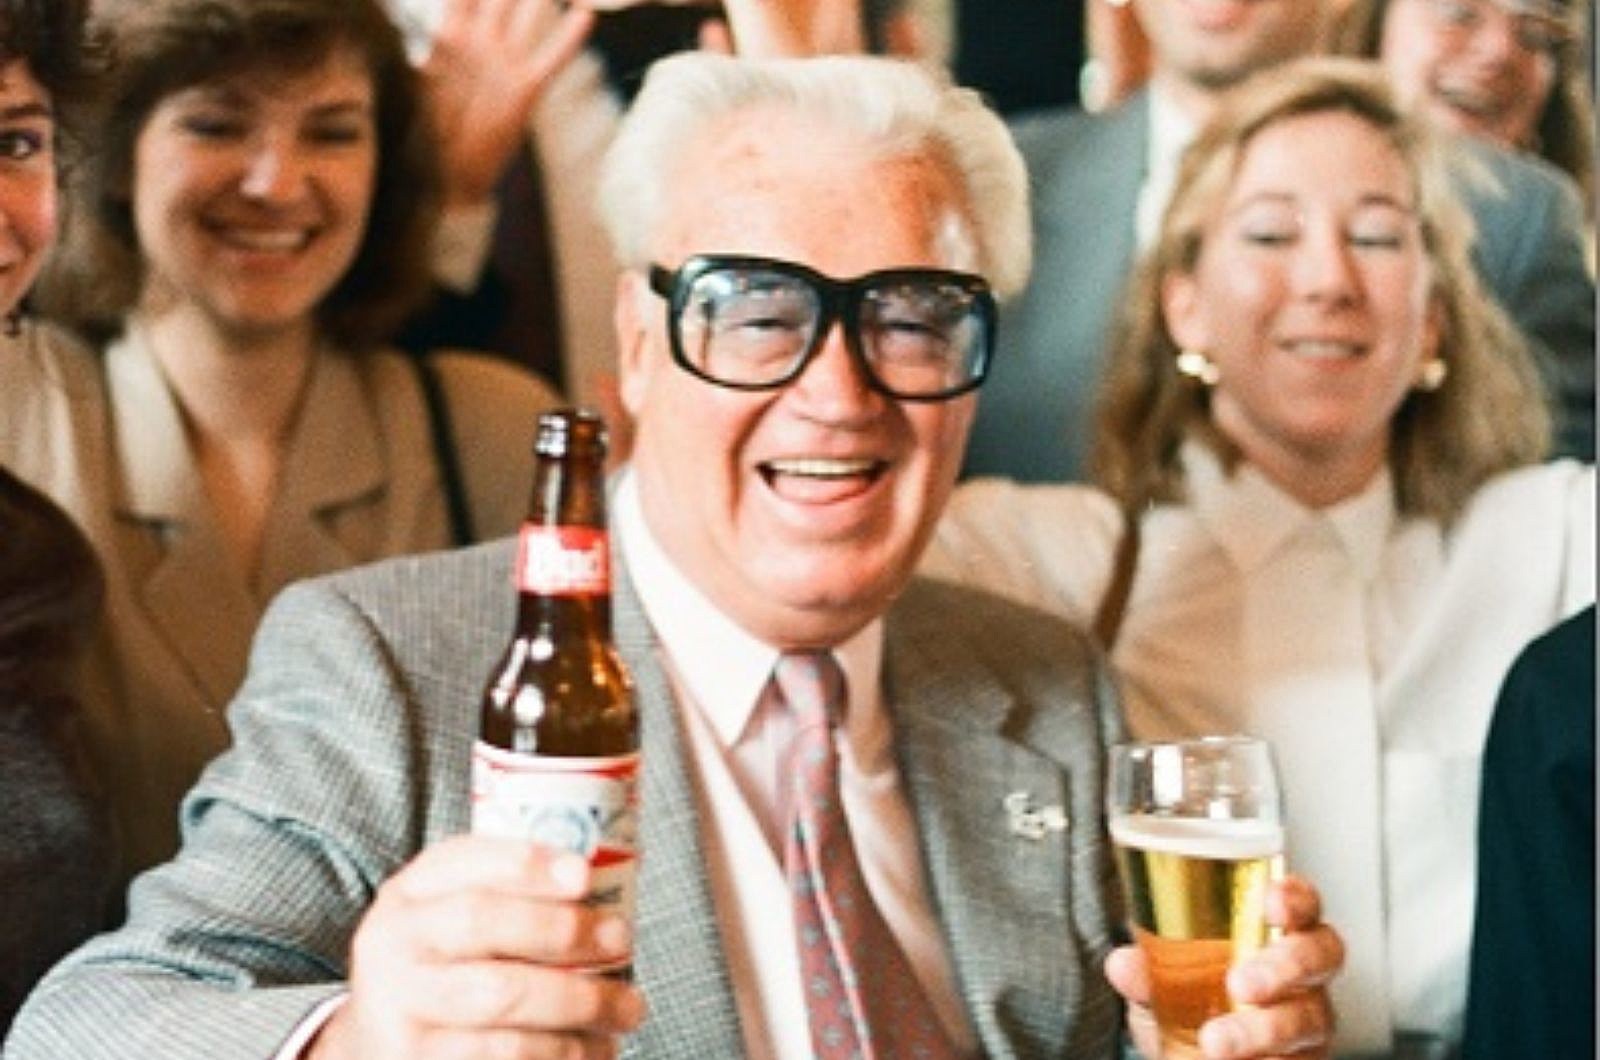 Harry Caray impressions still popular 20 years after his death